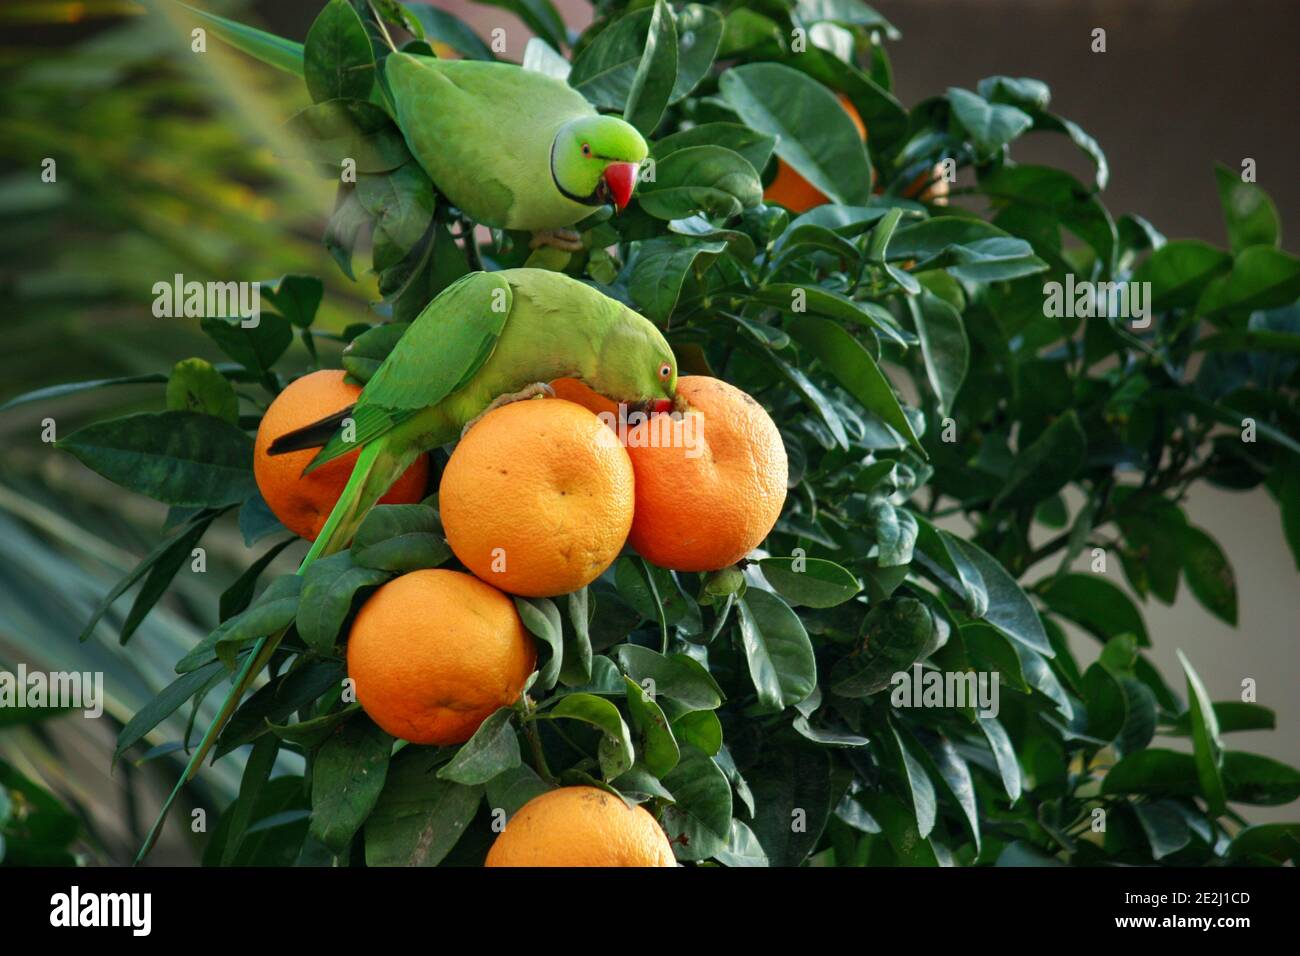 Two green parrots on top of an orange tree Stock Photo